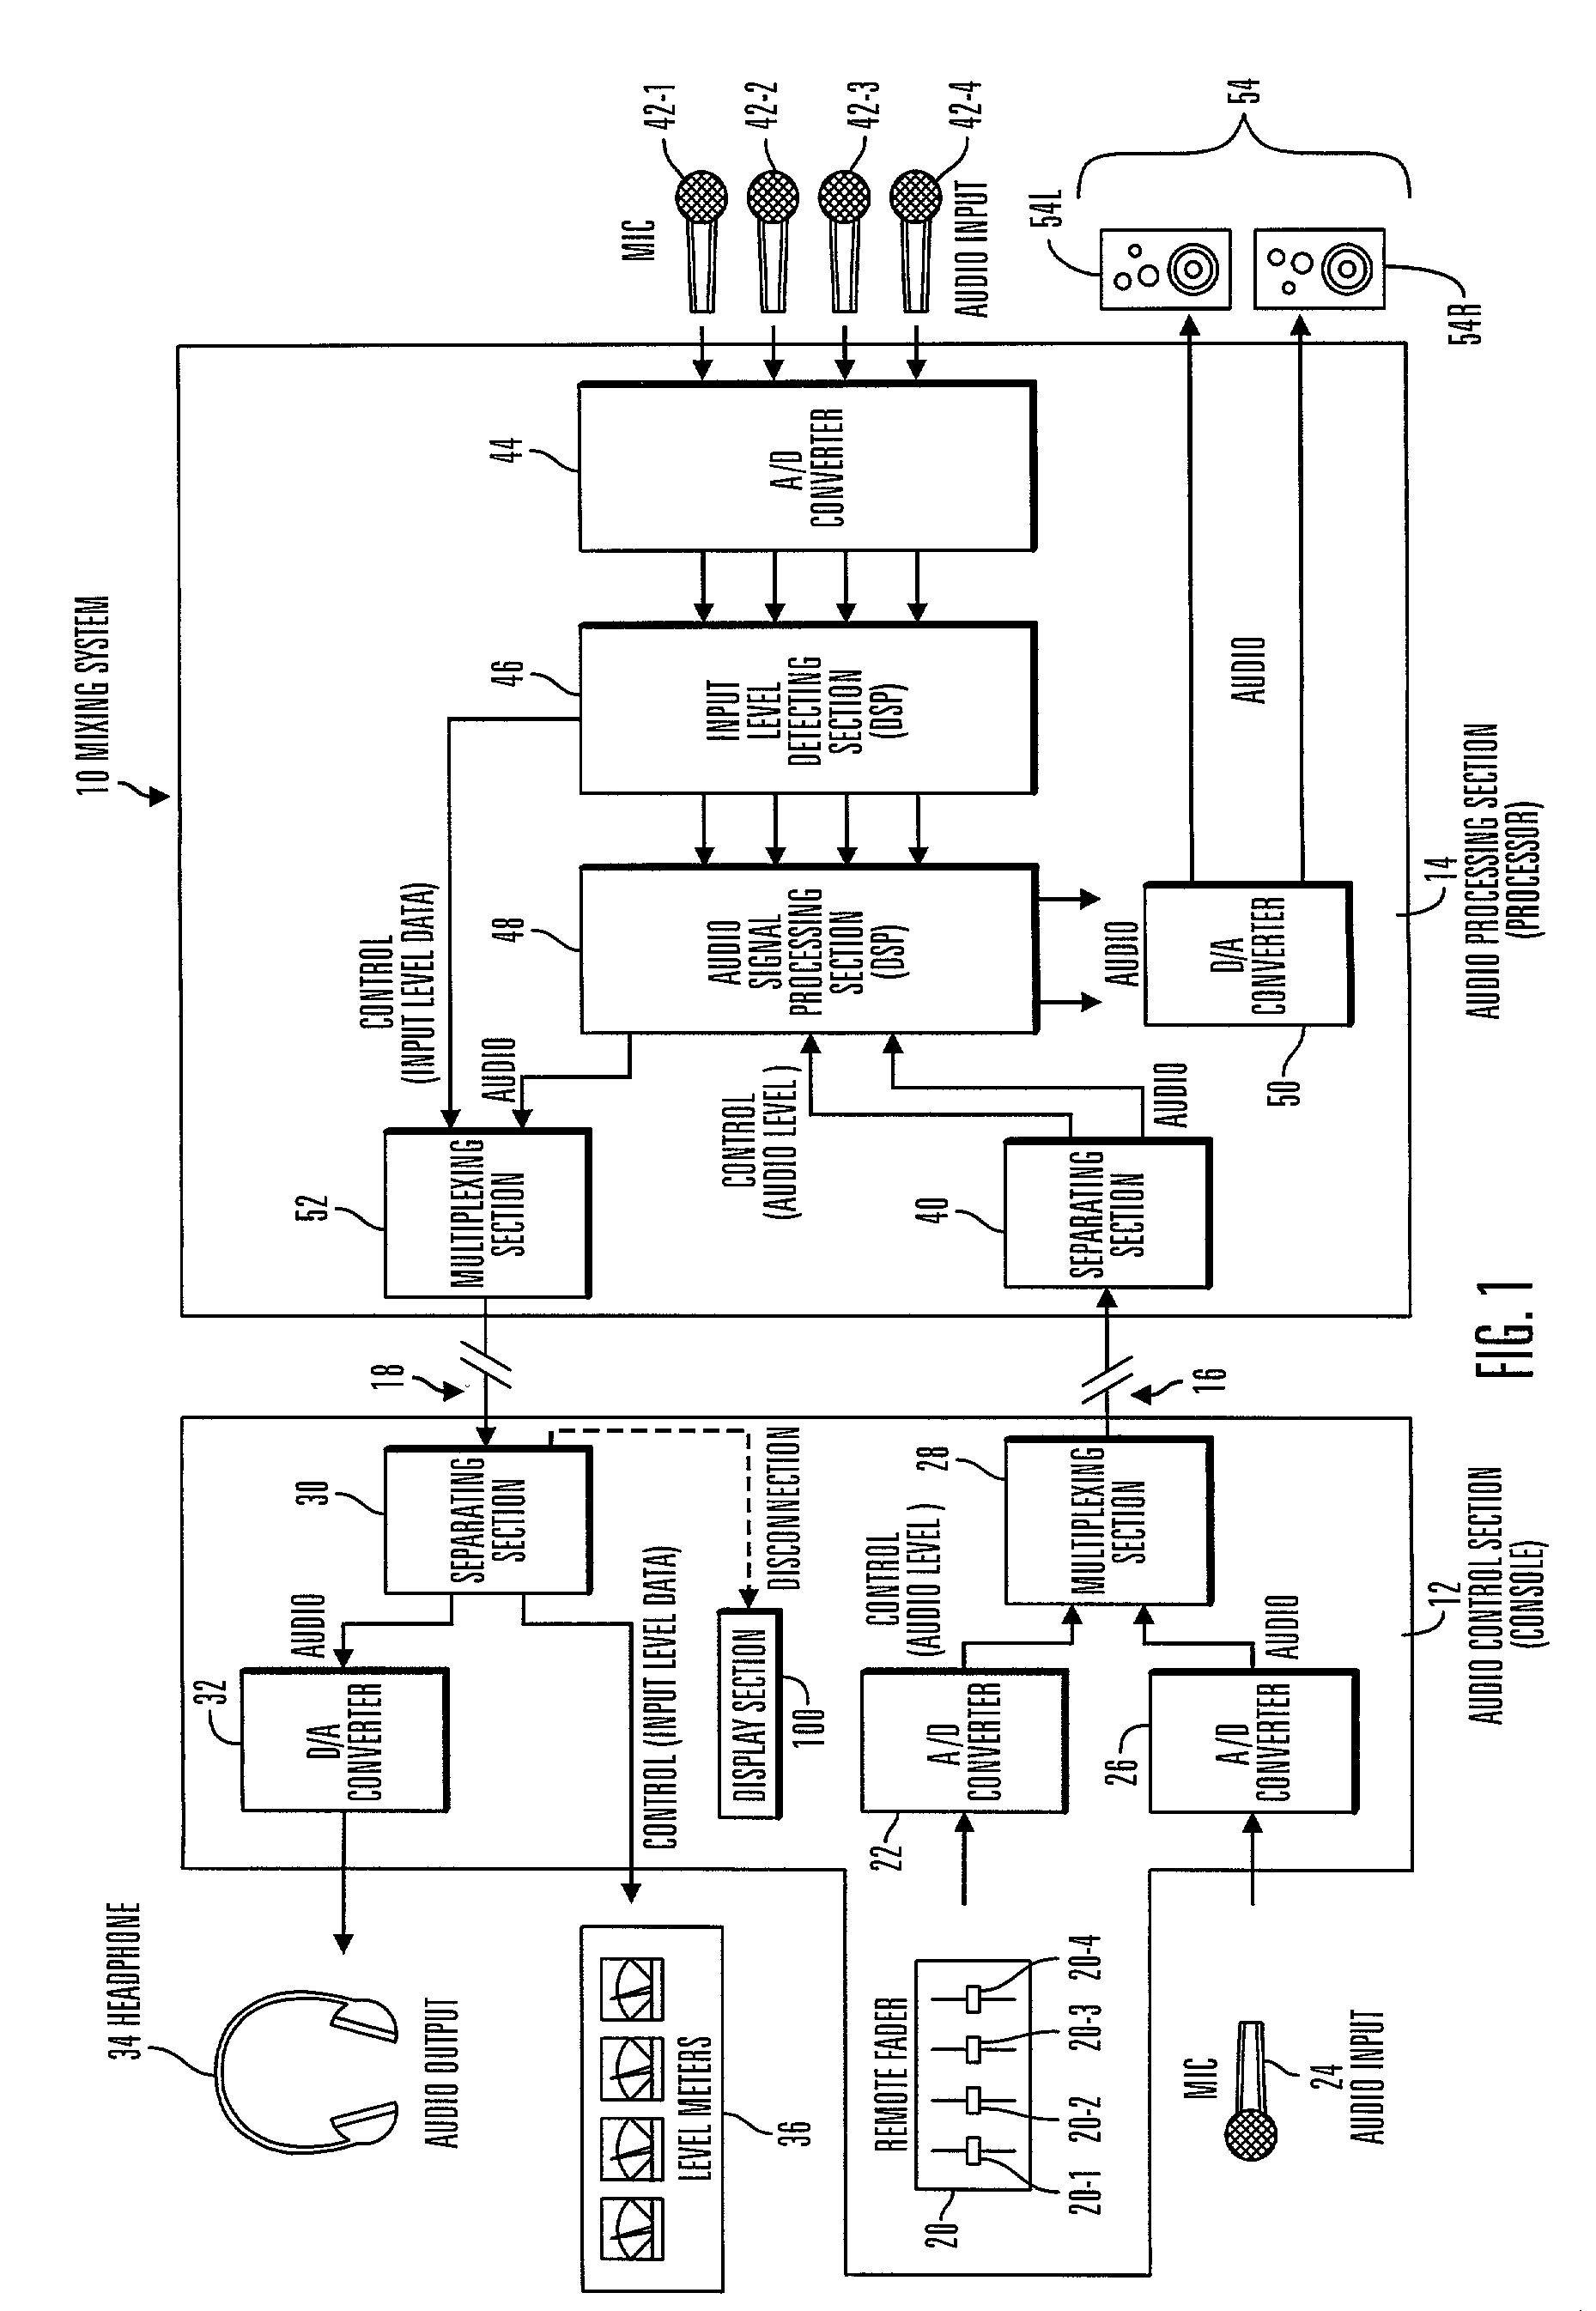 Audio control apparatus and audio processing apparatus in a mixing system